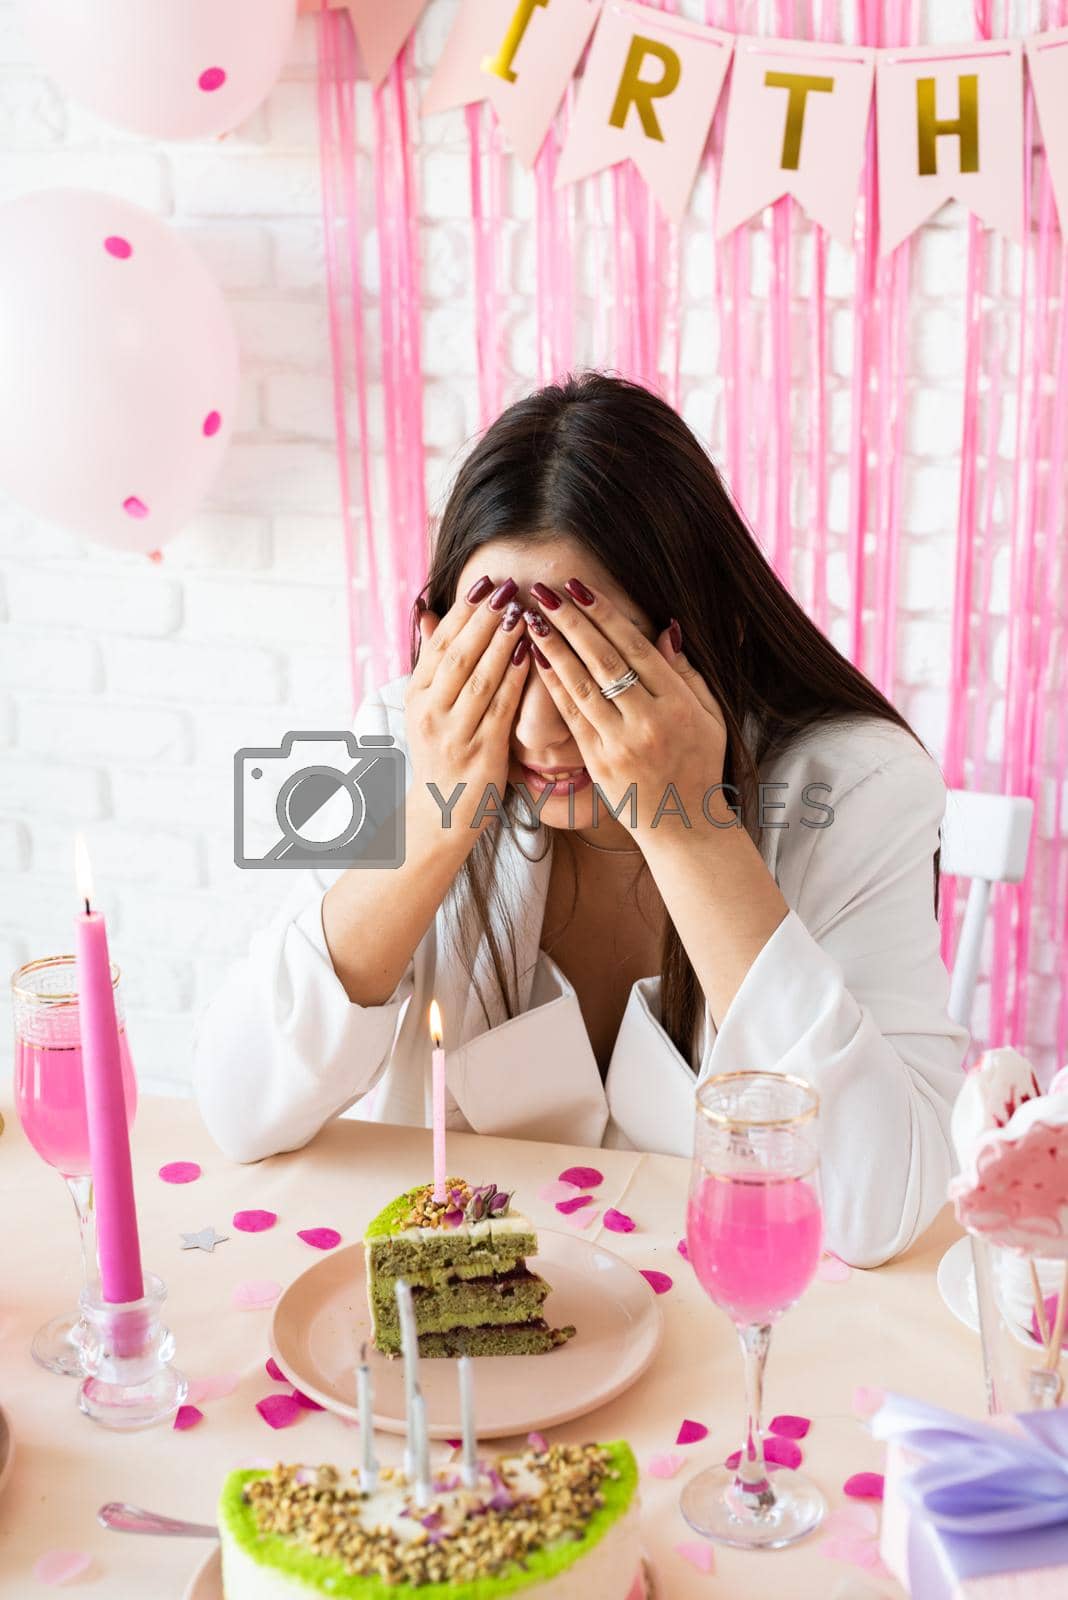 Royalty free image of Beautiful excited woman celebrating birthday party making wish by Desperada